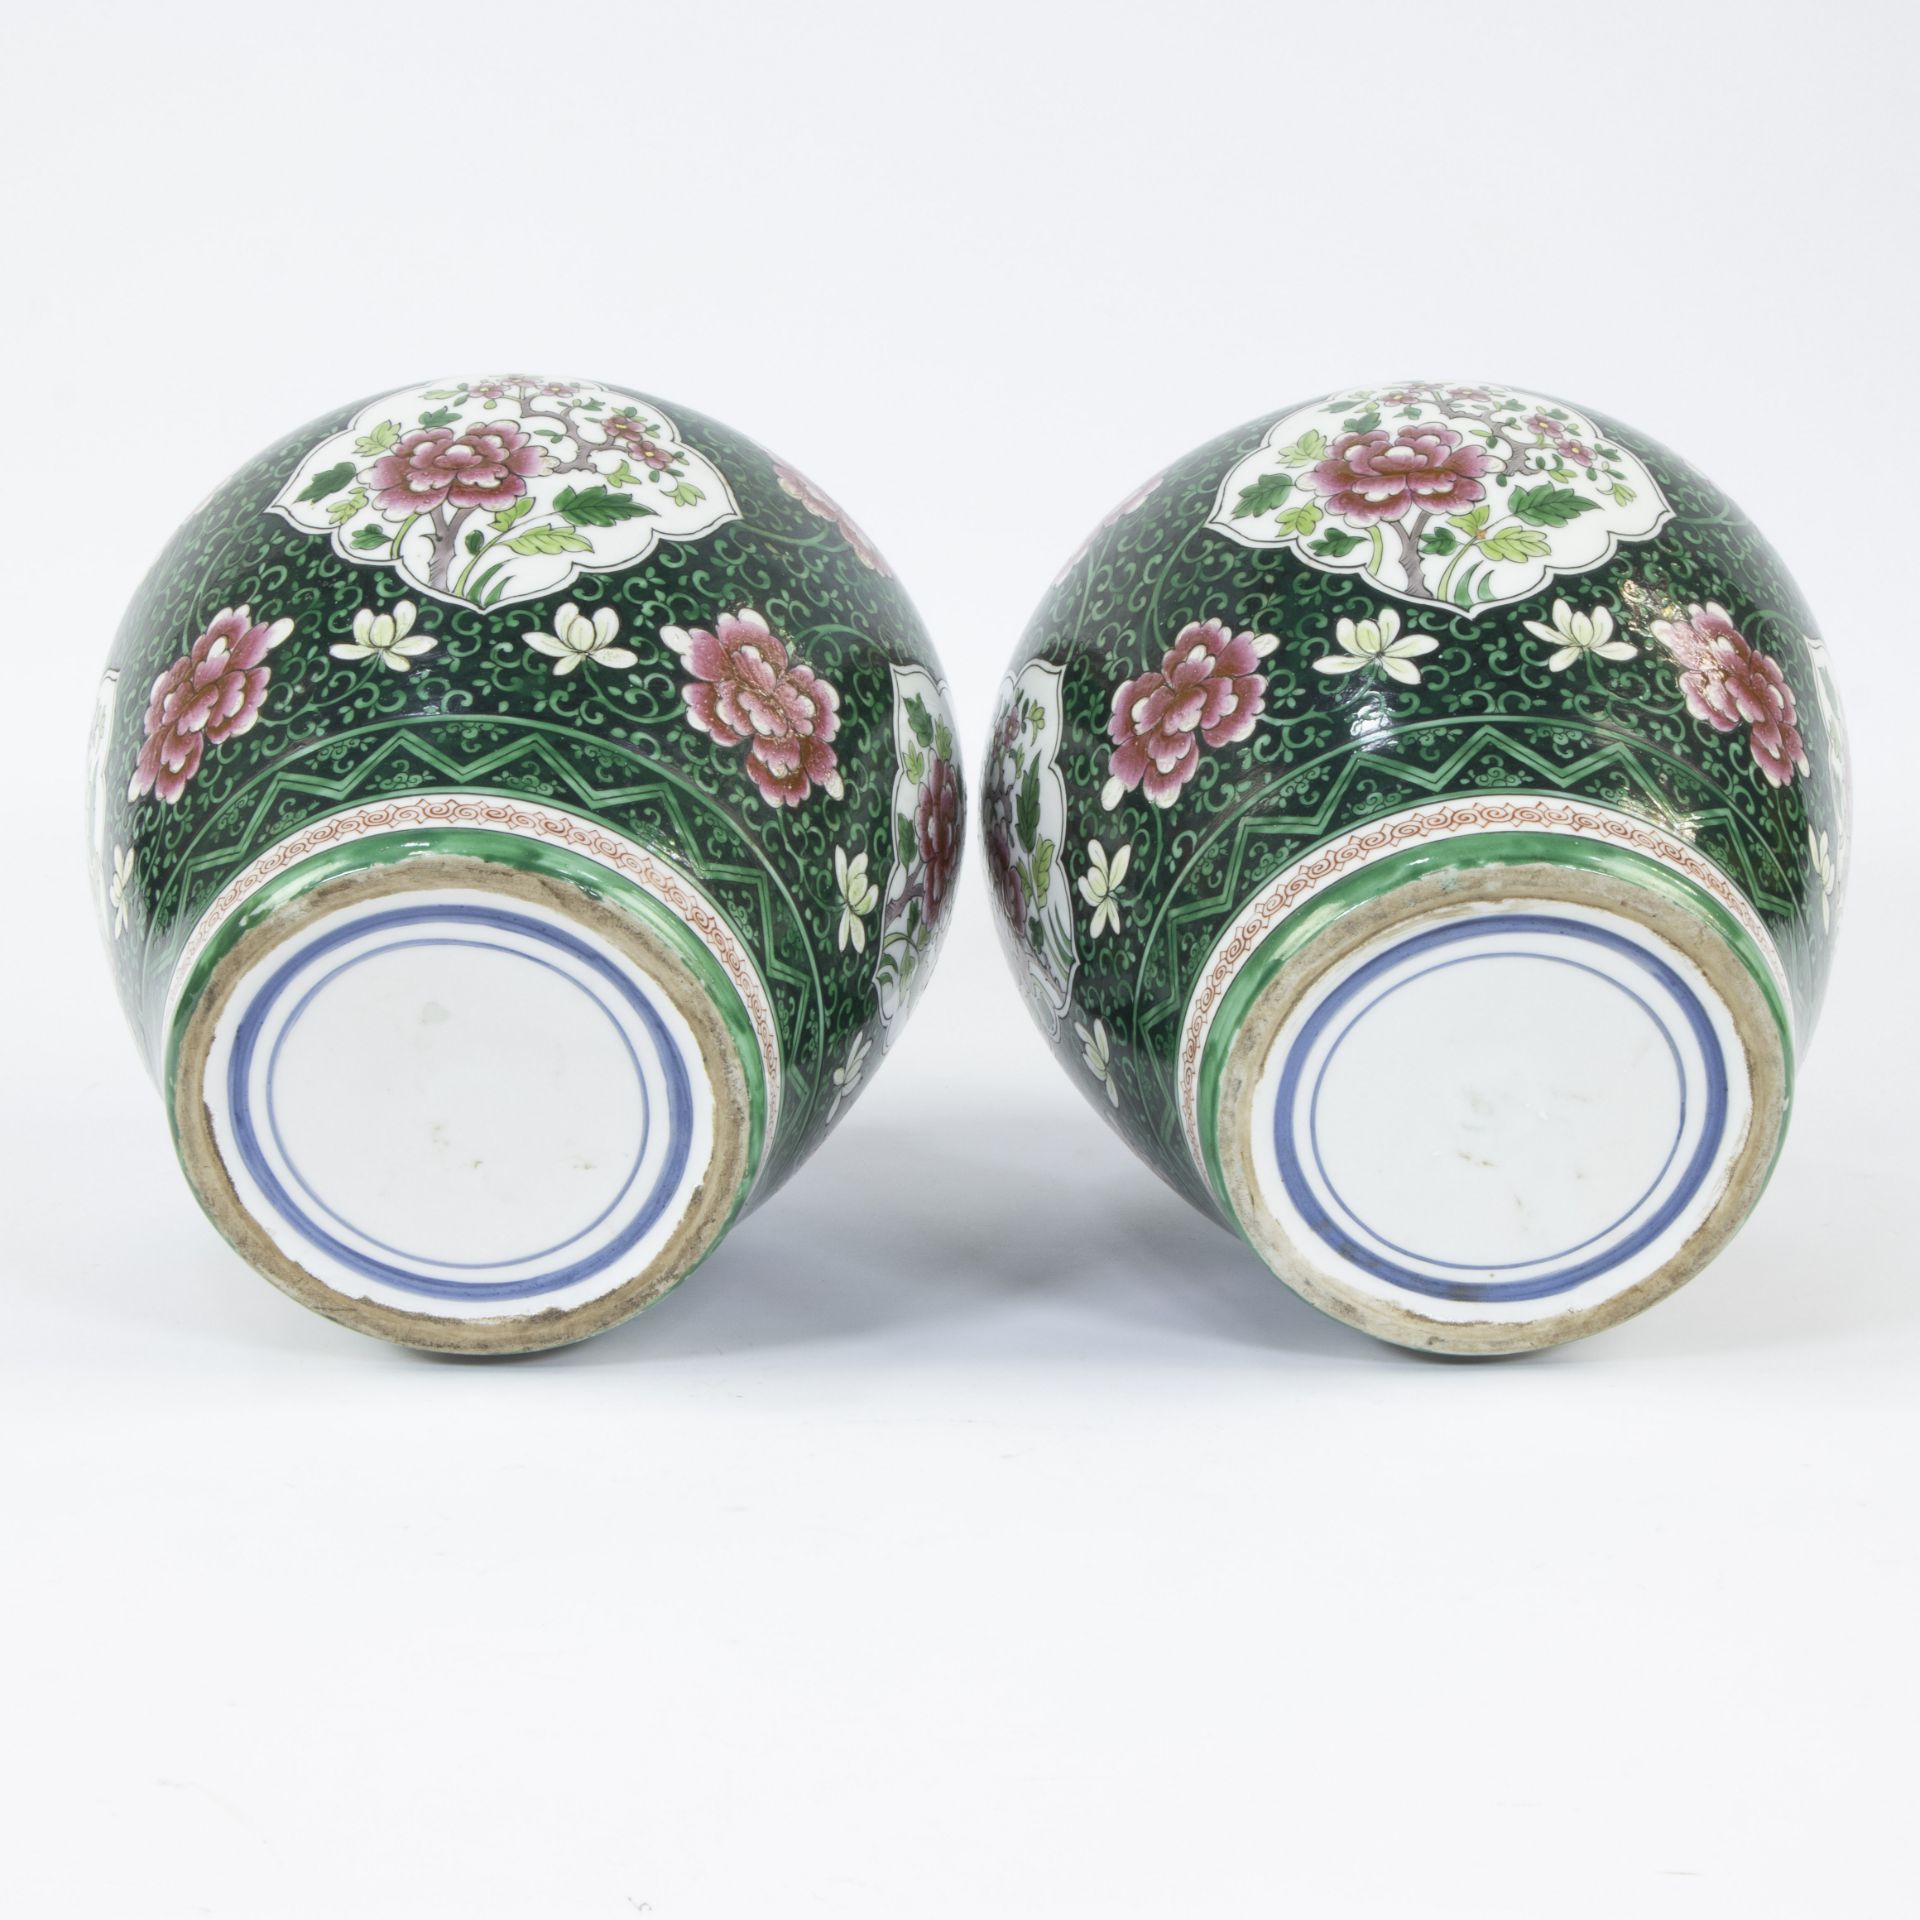 Pair of lidded vases in Samson porcelain with floral decoration in famille rose style - Bild 5 aus 7